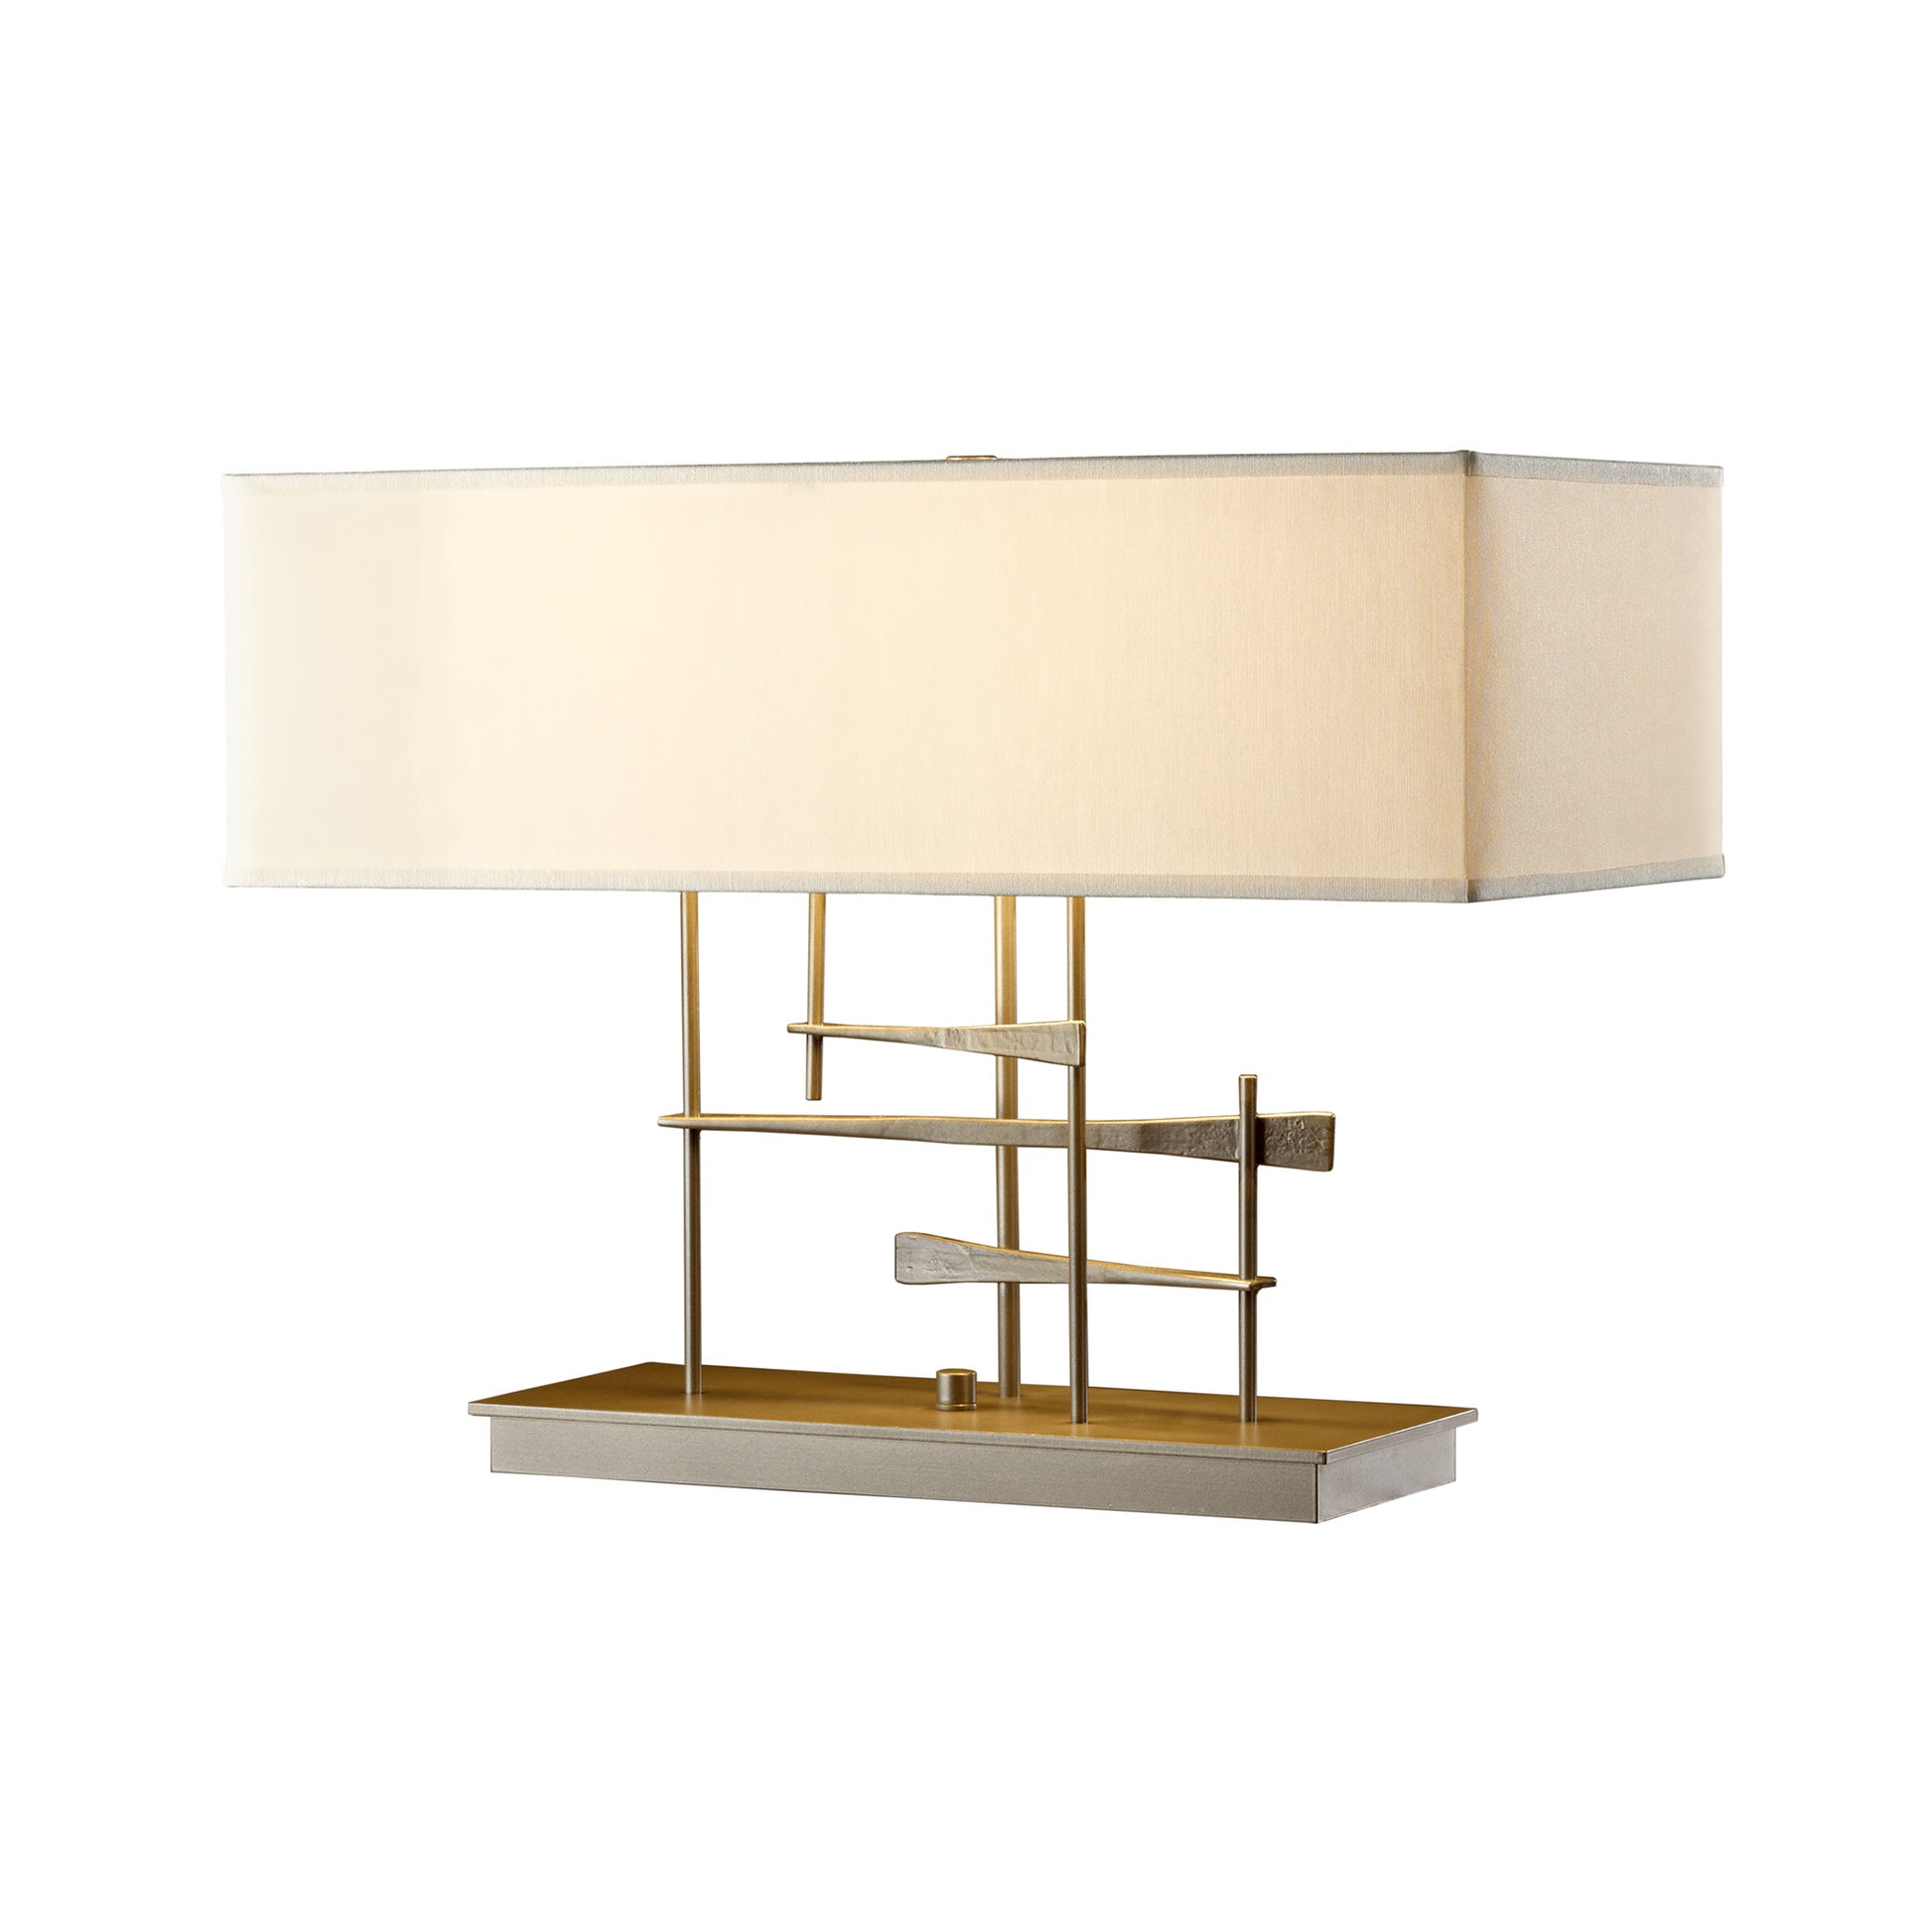 A contemporary Cavaletti Table Lamp by Hubbardton Forge with a rectangular beige shade, a hand-forged wrought iron frame, and a decorative horizontal element resembling a miniature staircase, positioned on a flat base.